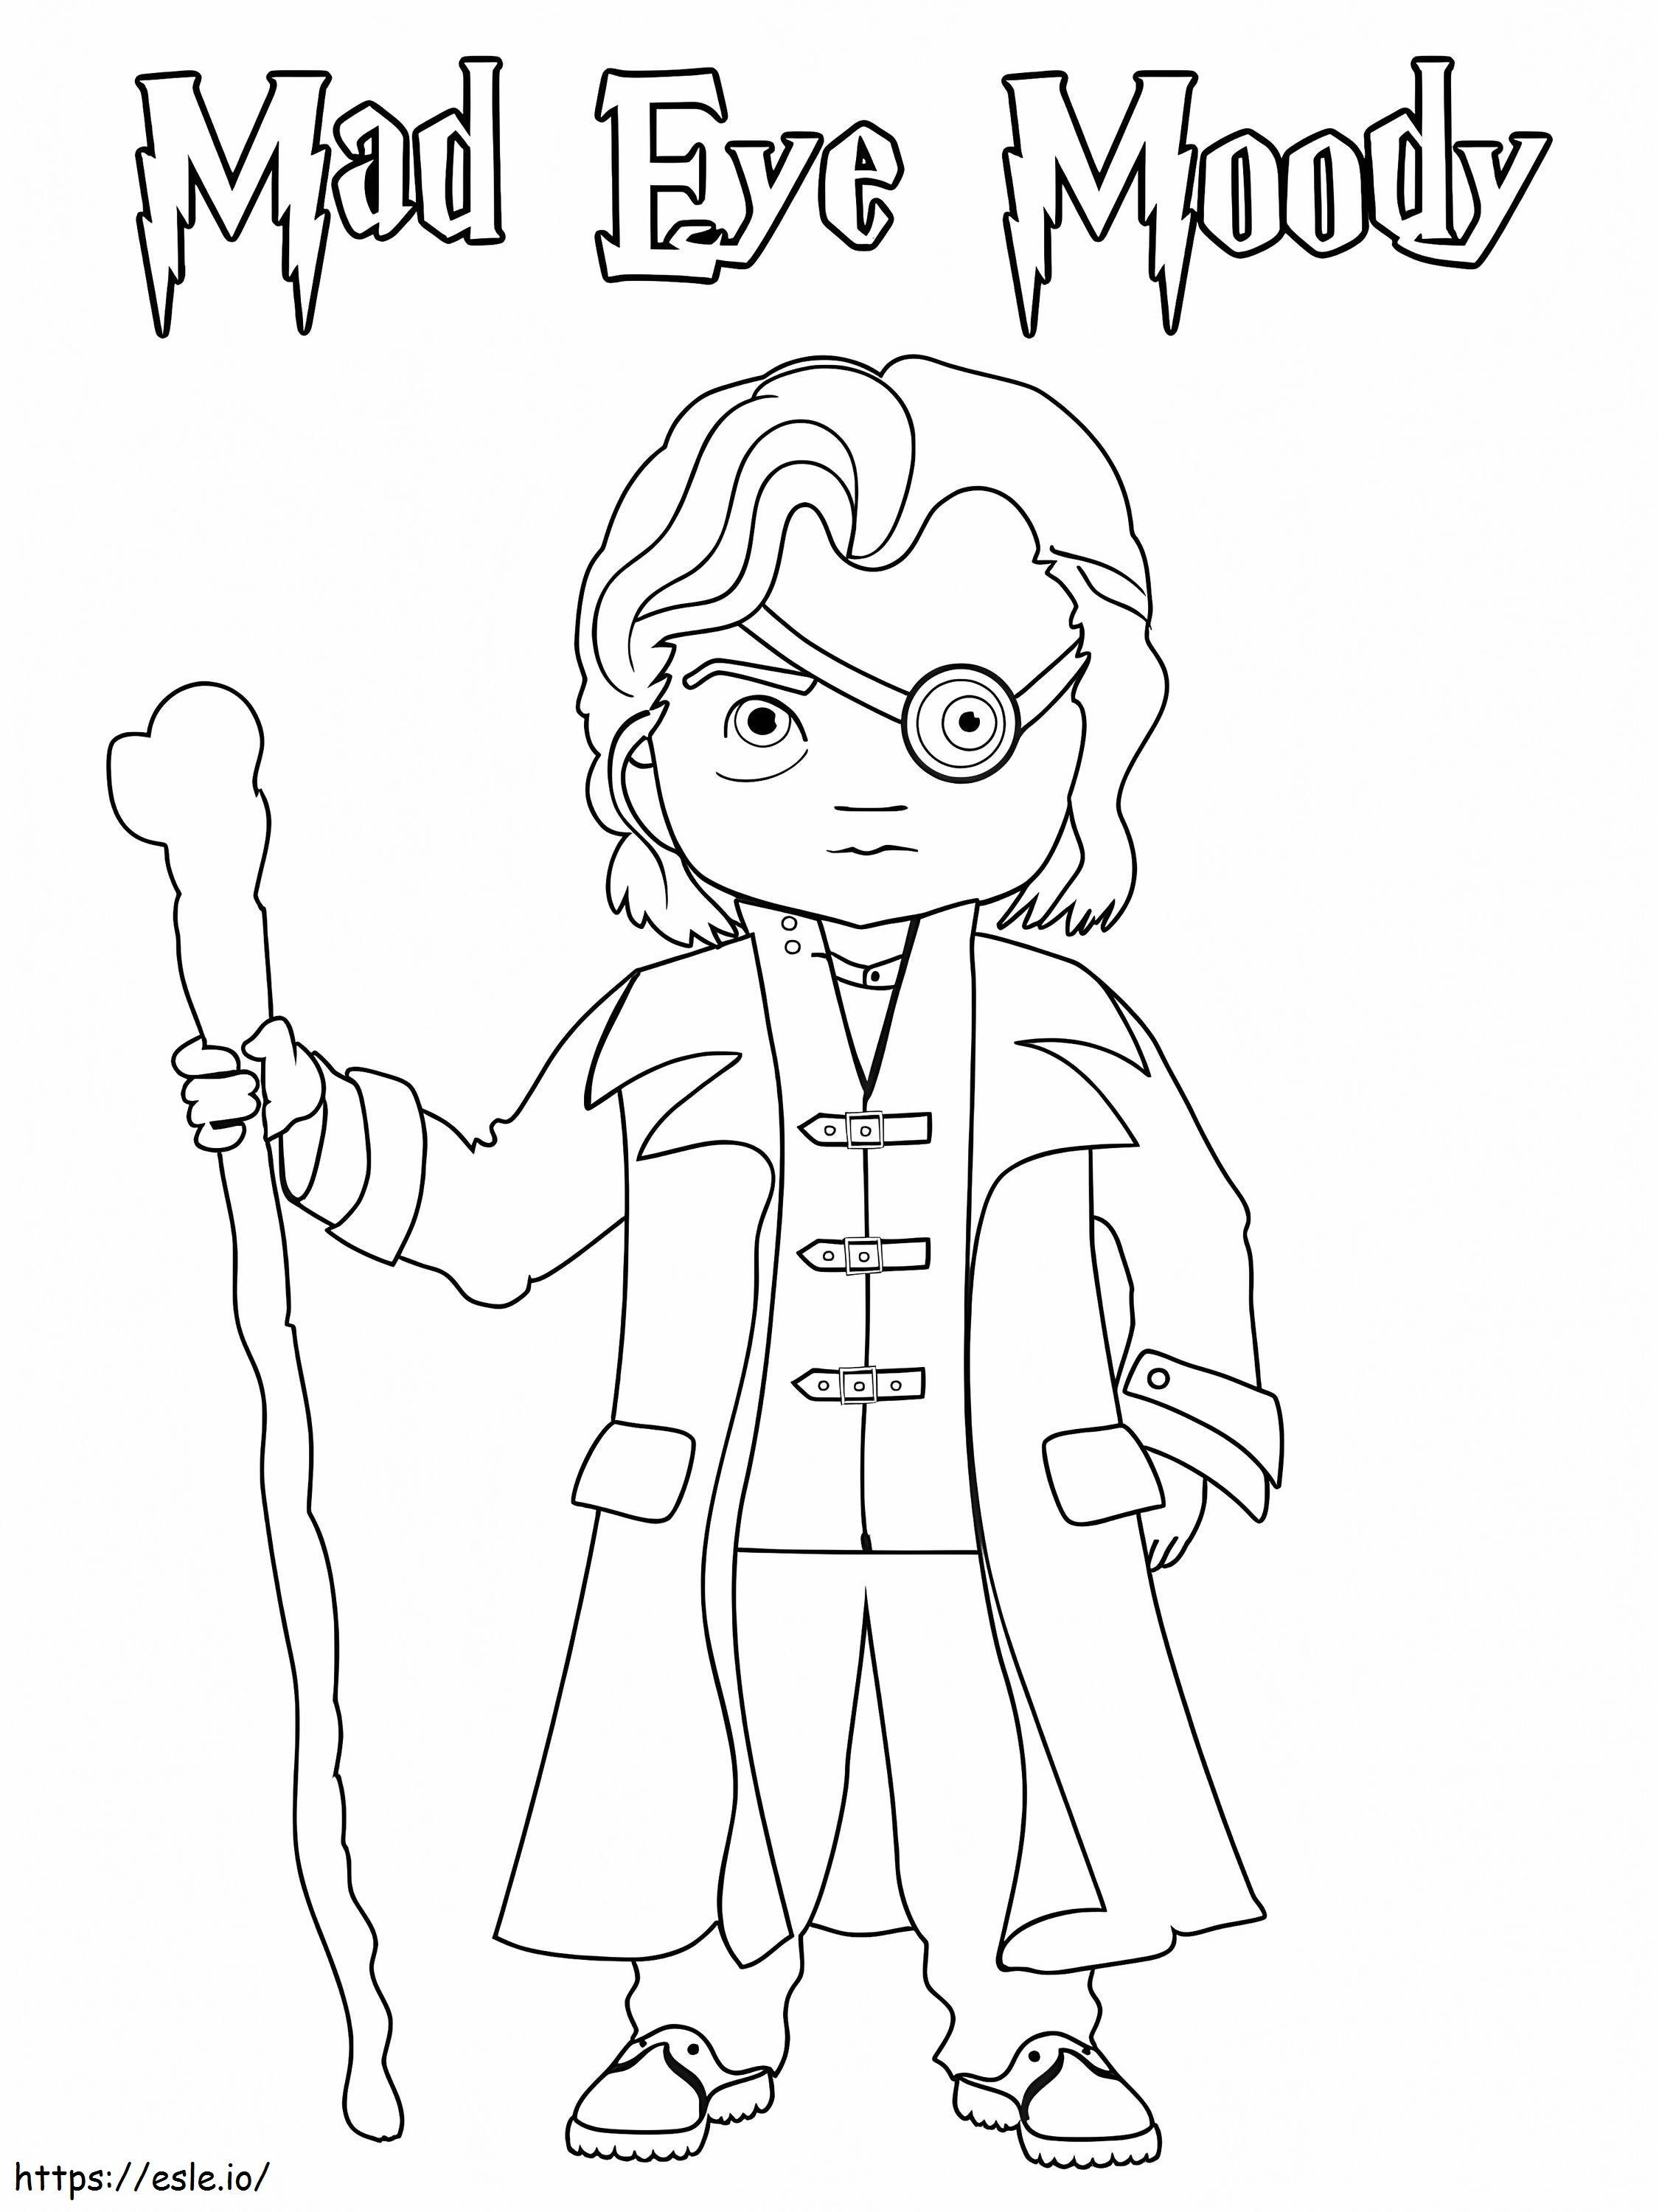 Mad Eye Moody coloring page